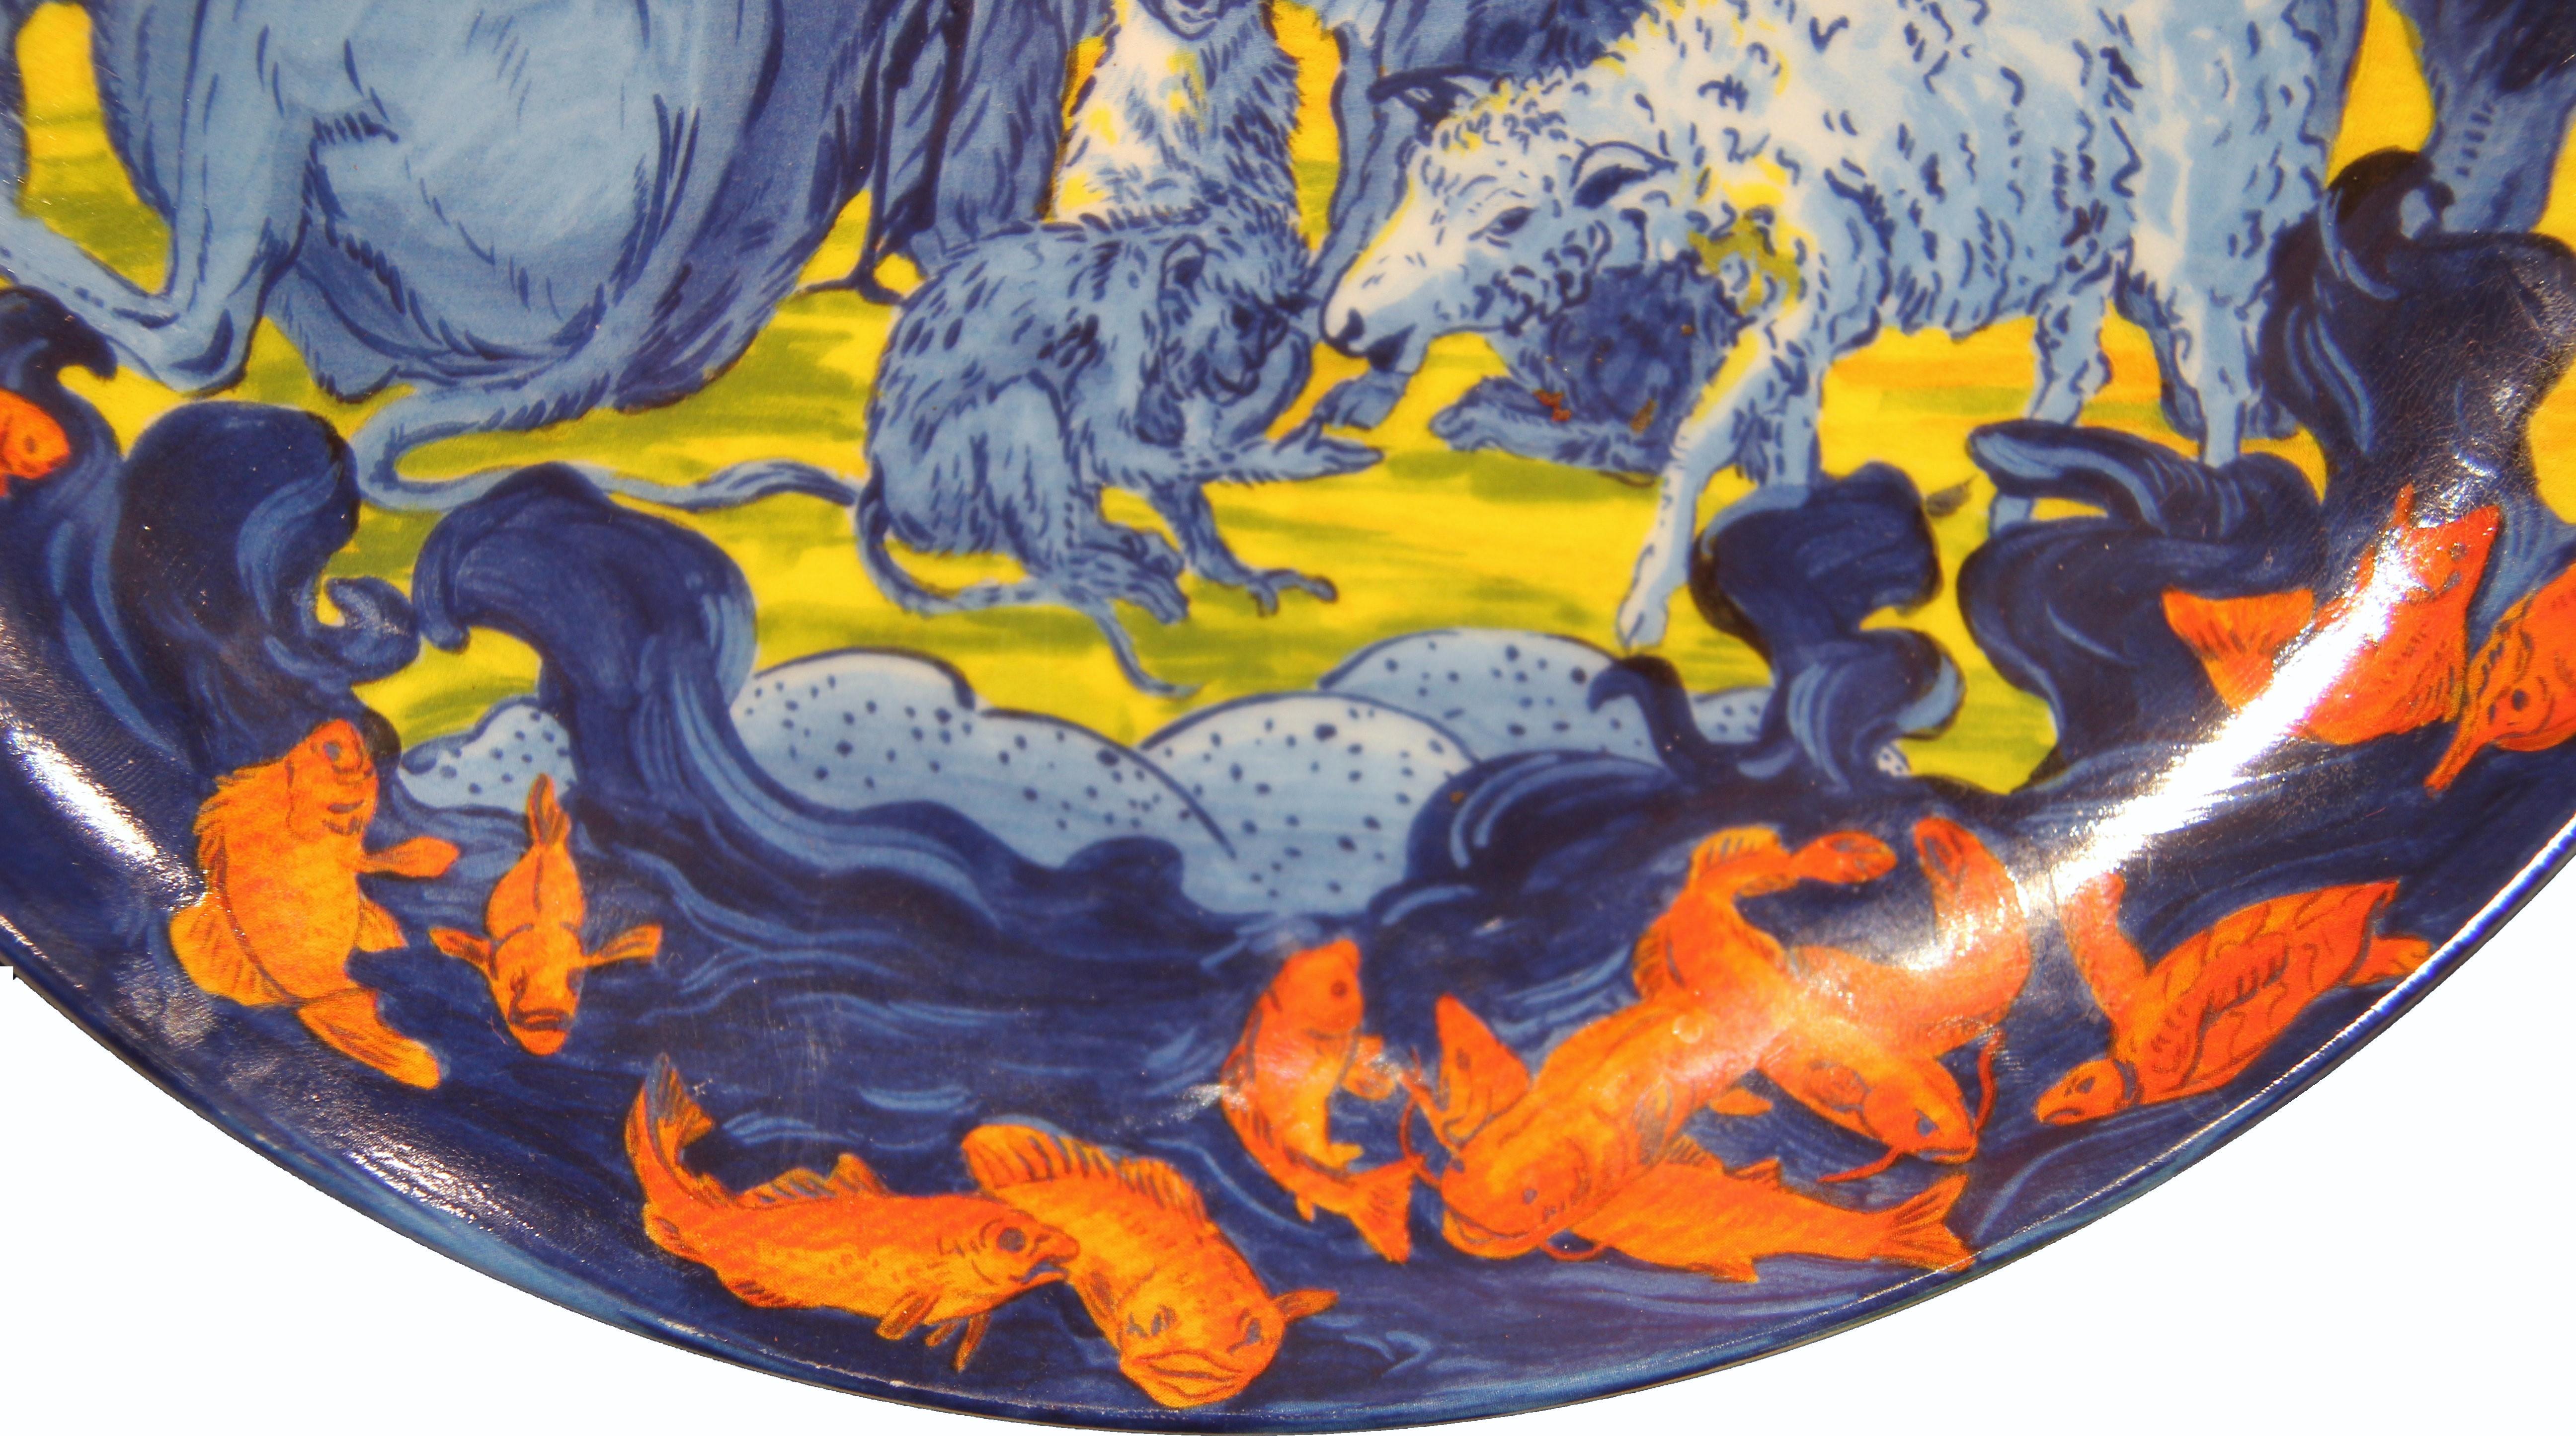 Limited edition artist plate printed for the Blaffer Gallery at the University of Houston by Swid Powell. The plate features different animals including lions, deer, bears, and birds along with koi fish framing the bottom of the plate. The piece is